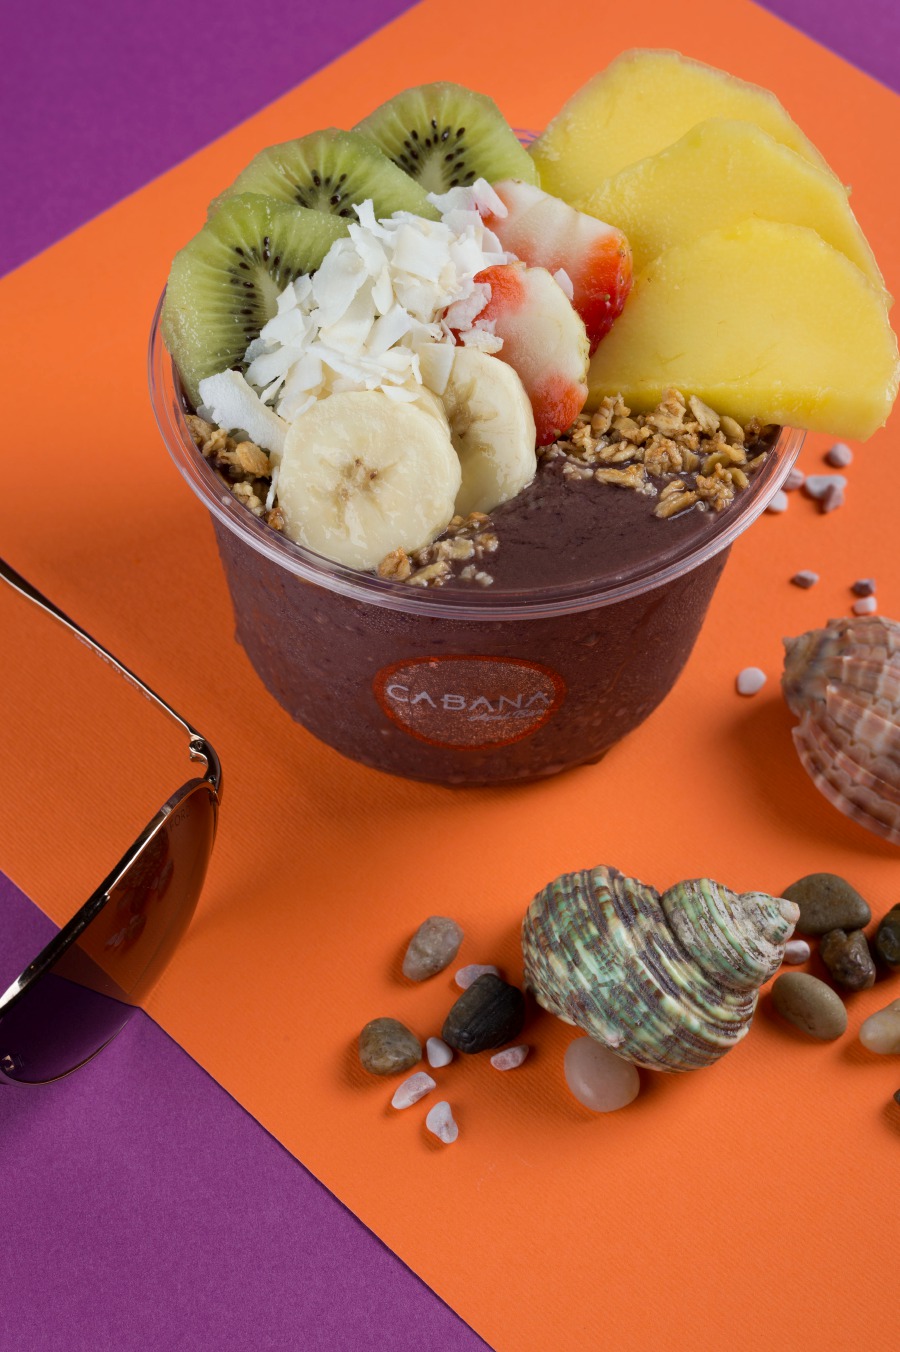 An acai bowl resembles a smoothie bowl and tastes like smoothie, only thicker, making it a meal that you won’t feel guilty about.